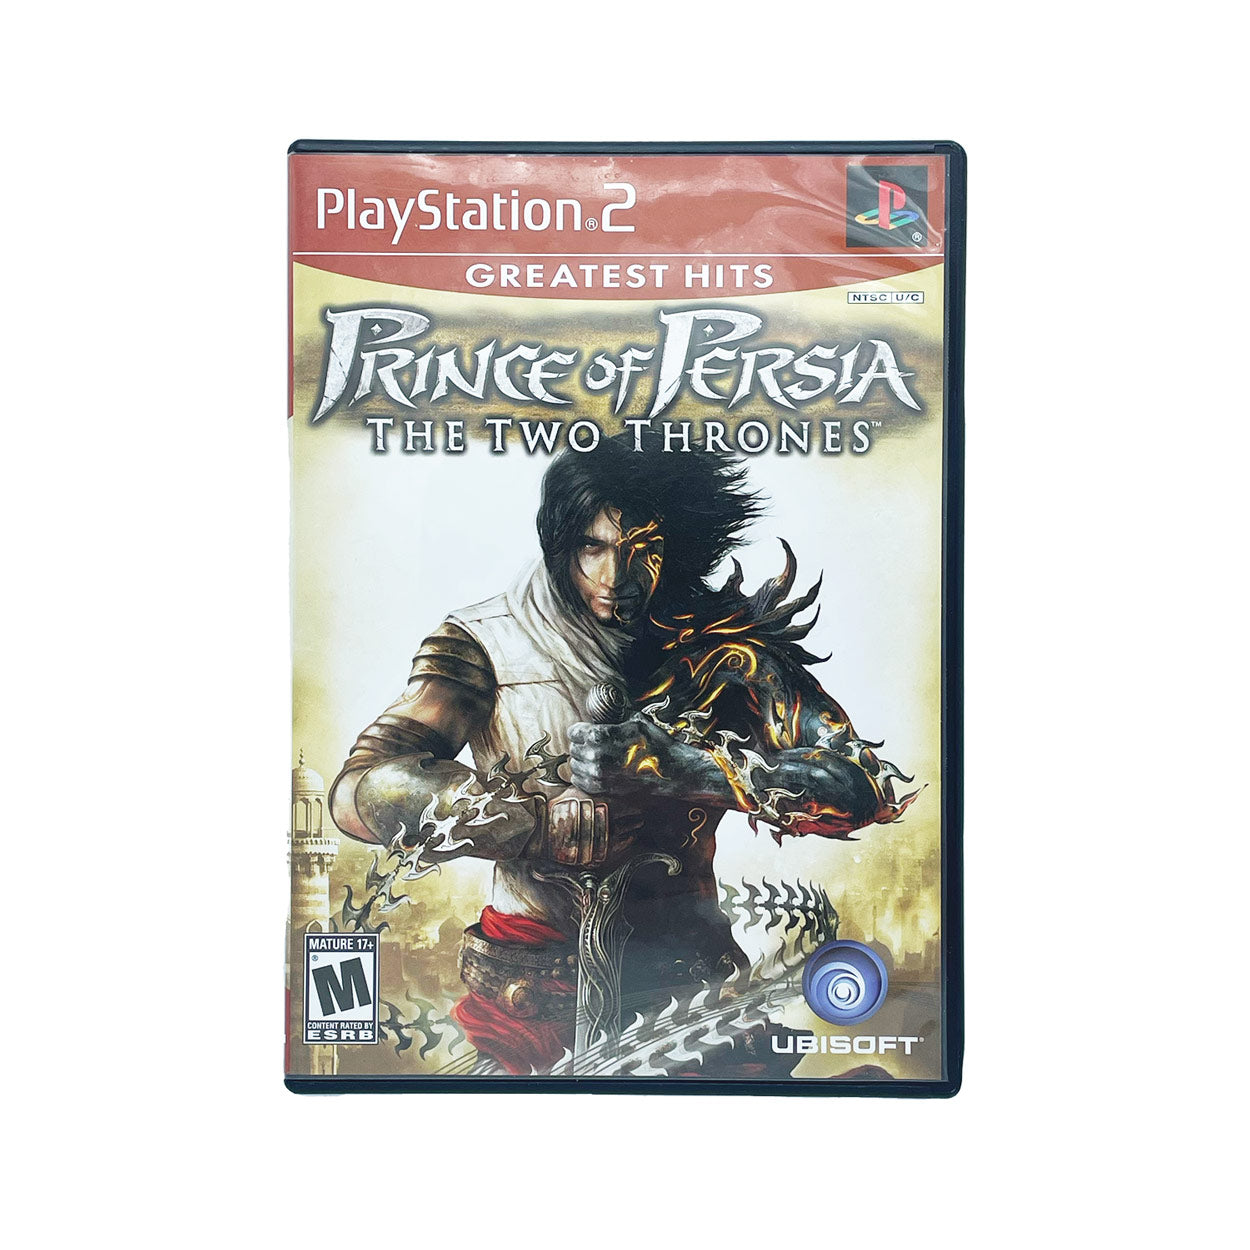 PRINCE OF PERSIA THE TWO THRONES (GH)